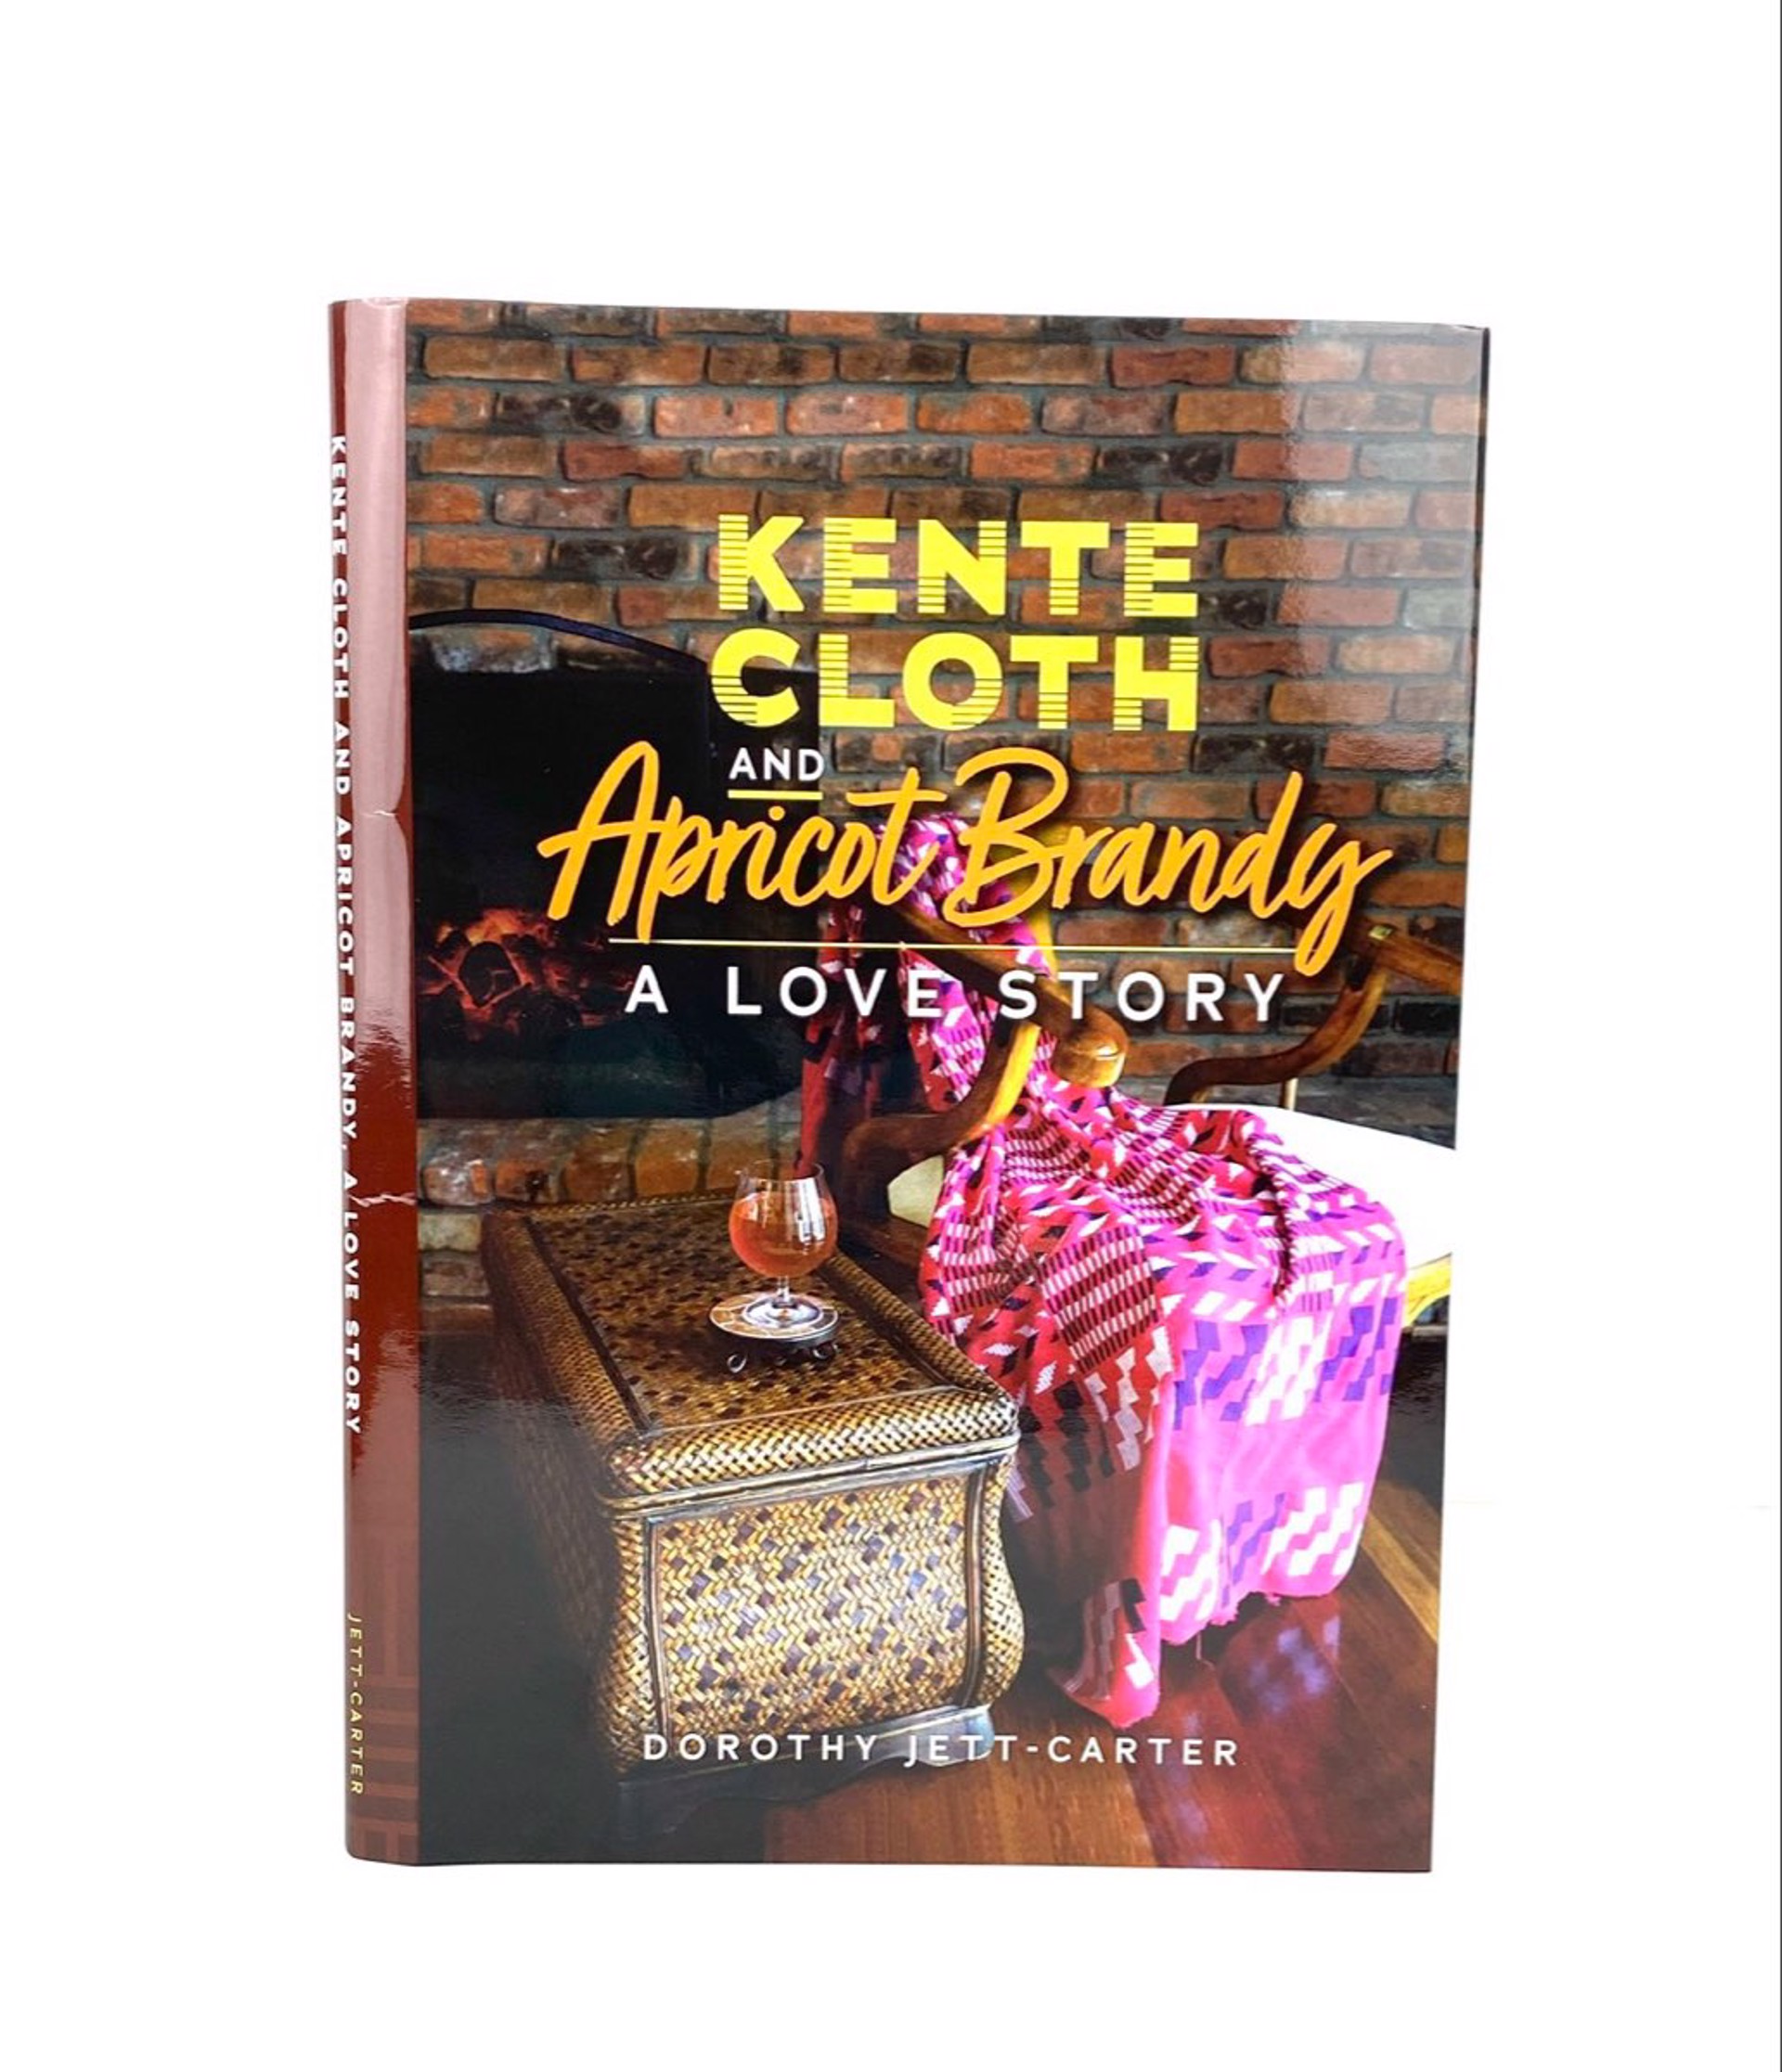 Kente Cloth and Apricot Brandy Book by Dorothy Jett-Carter